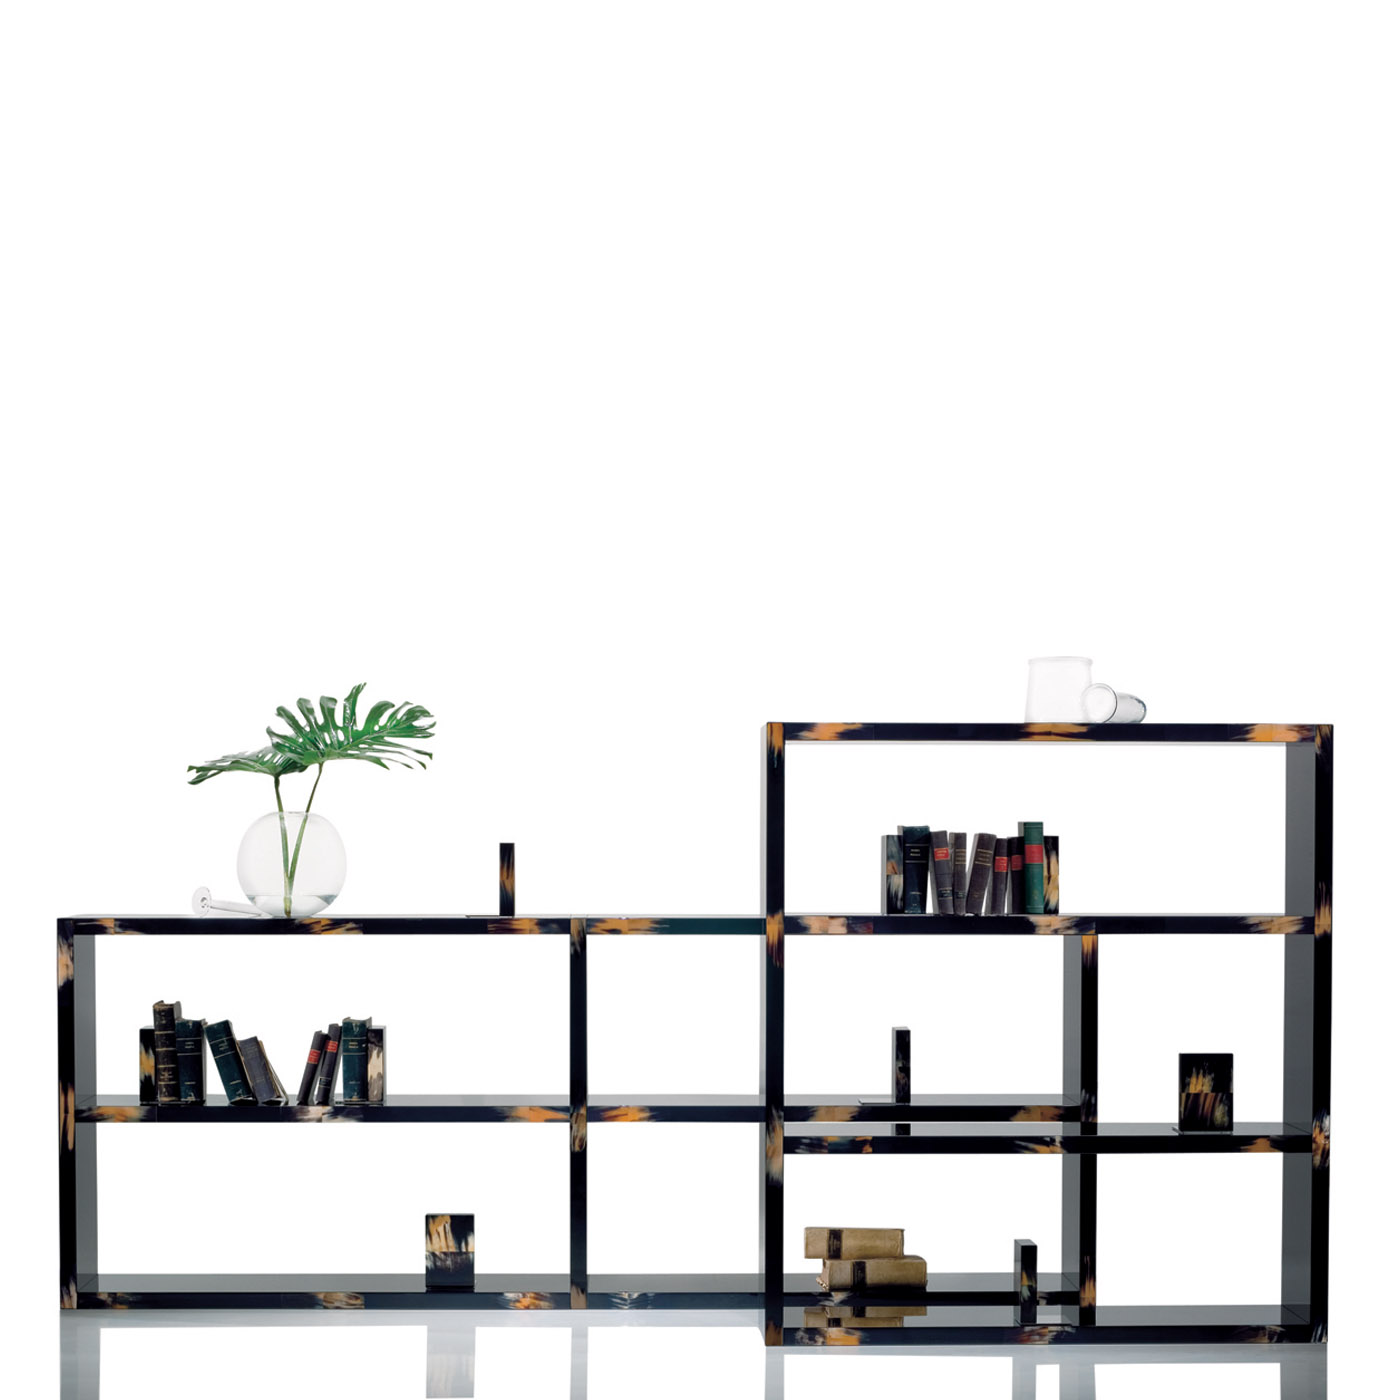 Cabinets and bookcases - Frida bookcase in glossy black lacquered wood - ambiance picture - Arcahorn